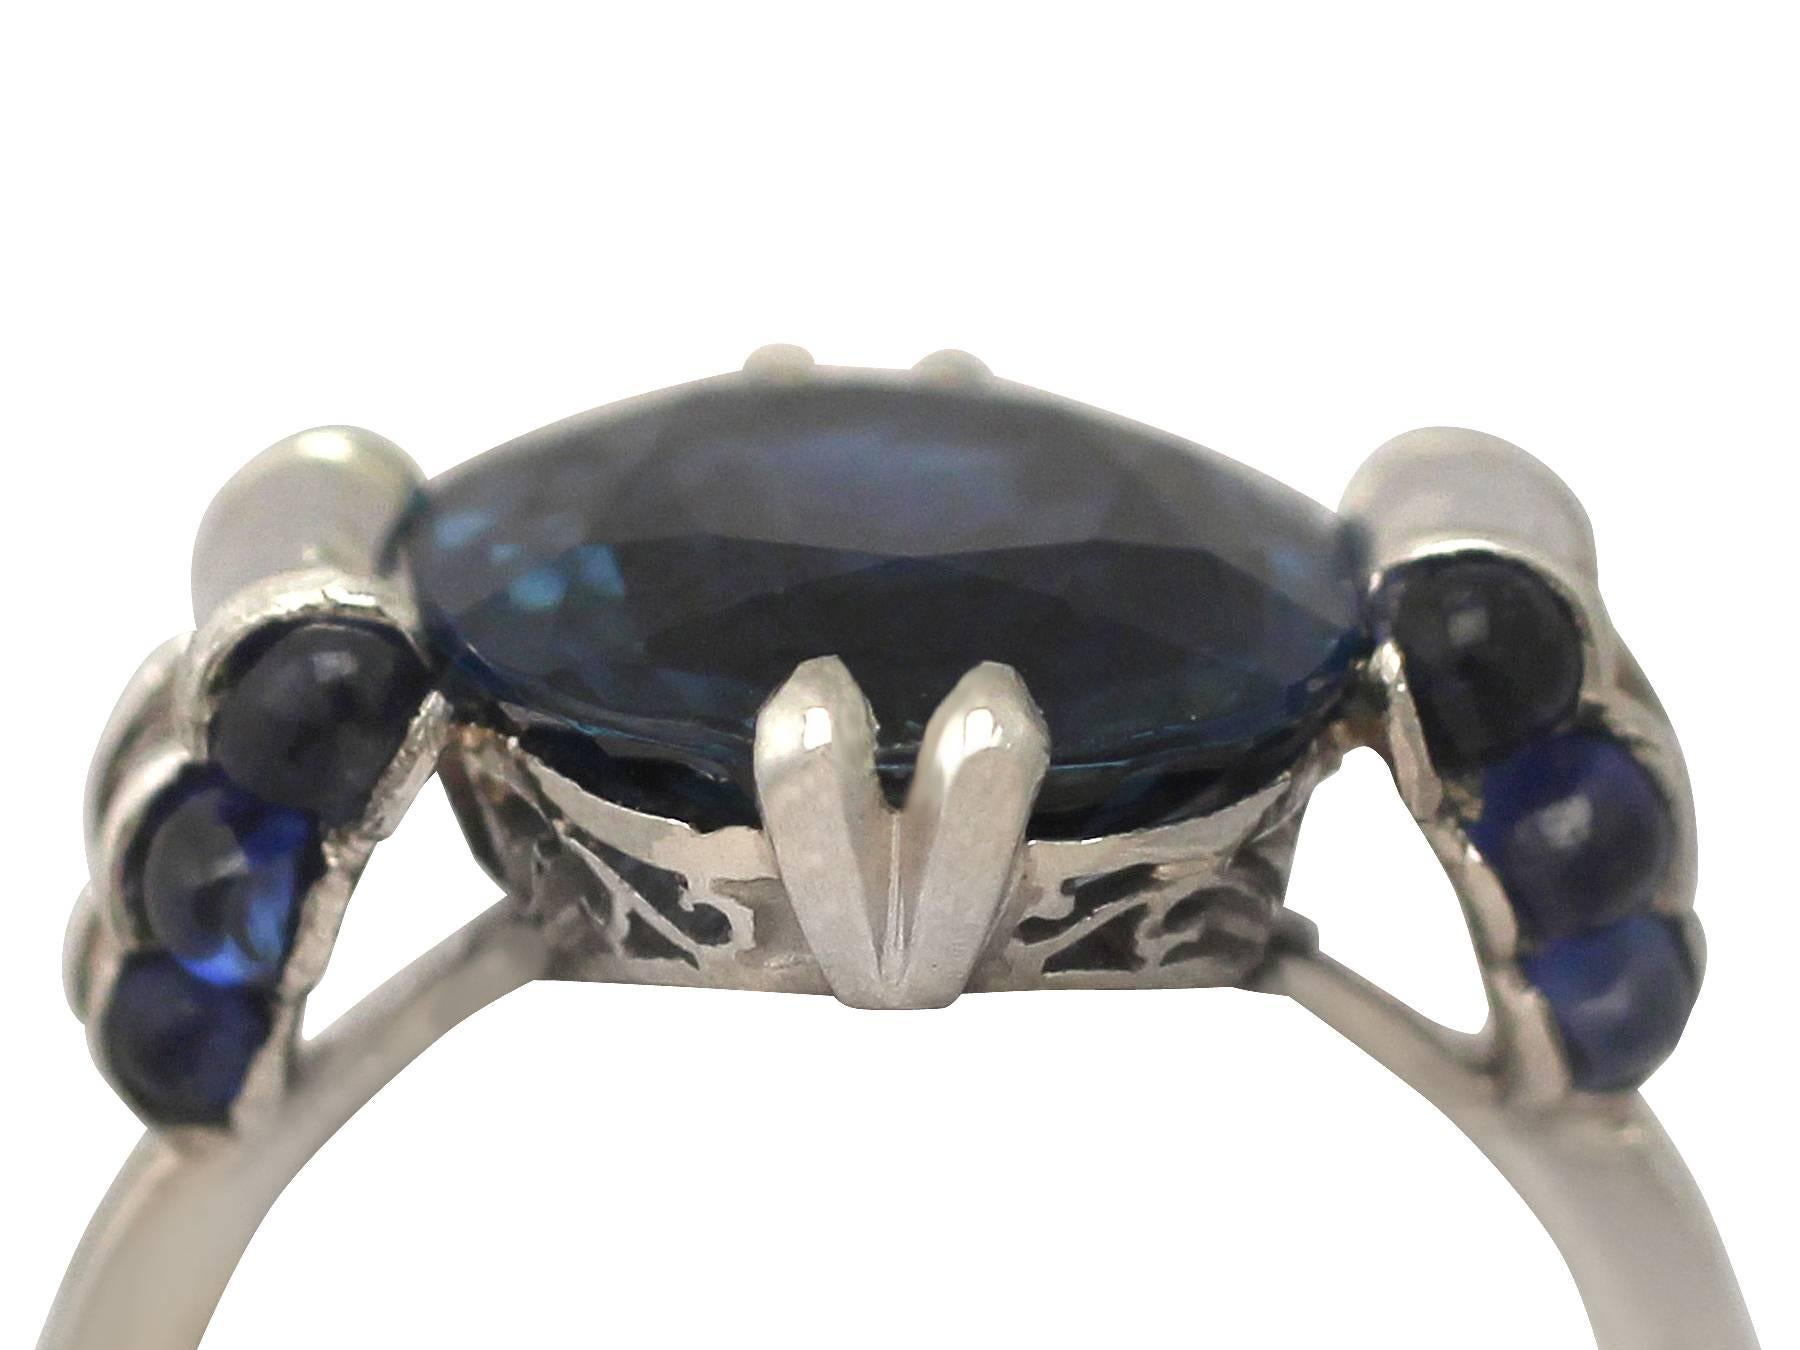 A stunning, fine and impressive Art Deco 5.22 Carat blue sapphire and platinum cocktail ring; part of our diverse antique jewelry and estate jewelry collections

This stunning, fine and impressive antique oval cut sapphire ring has been crafted in